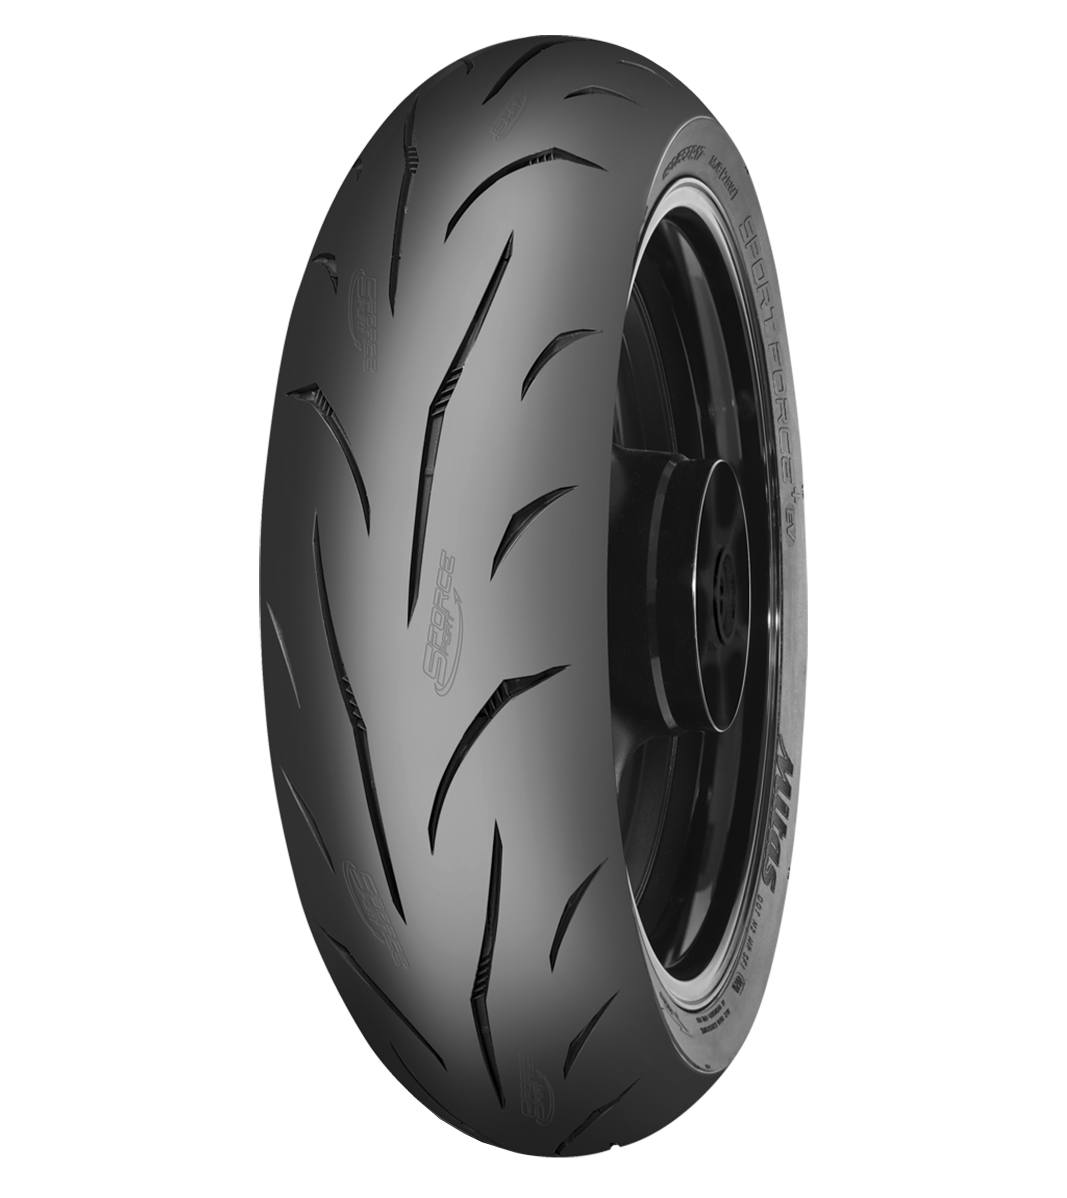 Mitas SPORT FORCE+ EV 190/55ZR17 Motorcycle Sport On-Road EVOLUTION (75W) No Stripe Tubeless Rear Tire, 603830, 190/55ZR17, Motorcycle Sport, On-Road, Rear, Sport, Sport Force+ EV, Sport Touring, Tires - Imported and distributed in North & South America by Lindeco Genuine Powersports - Premier Powersports Equipment and Accessories for Motorcycle Enthusiasts, Professional Riders and Dealers.